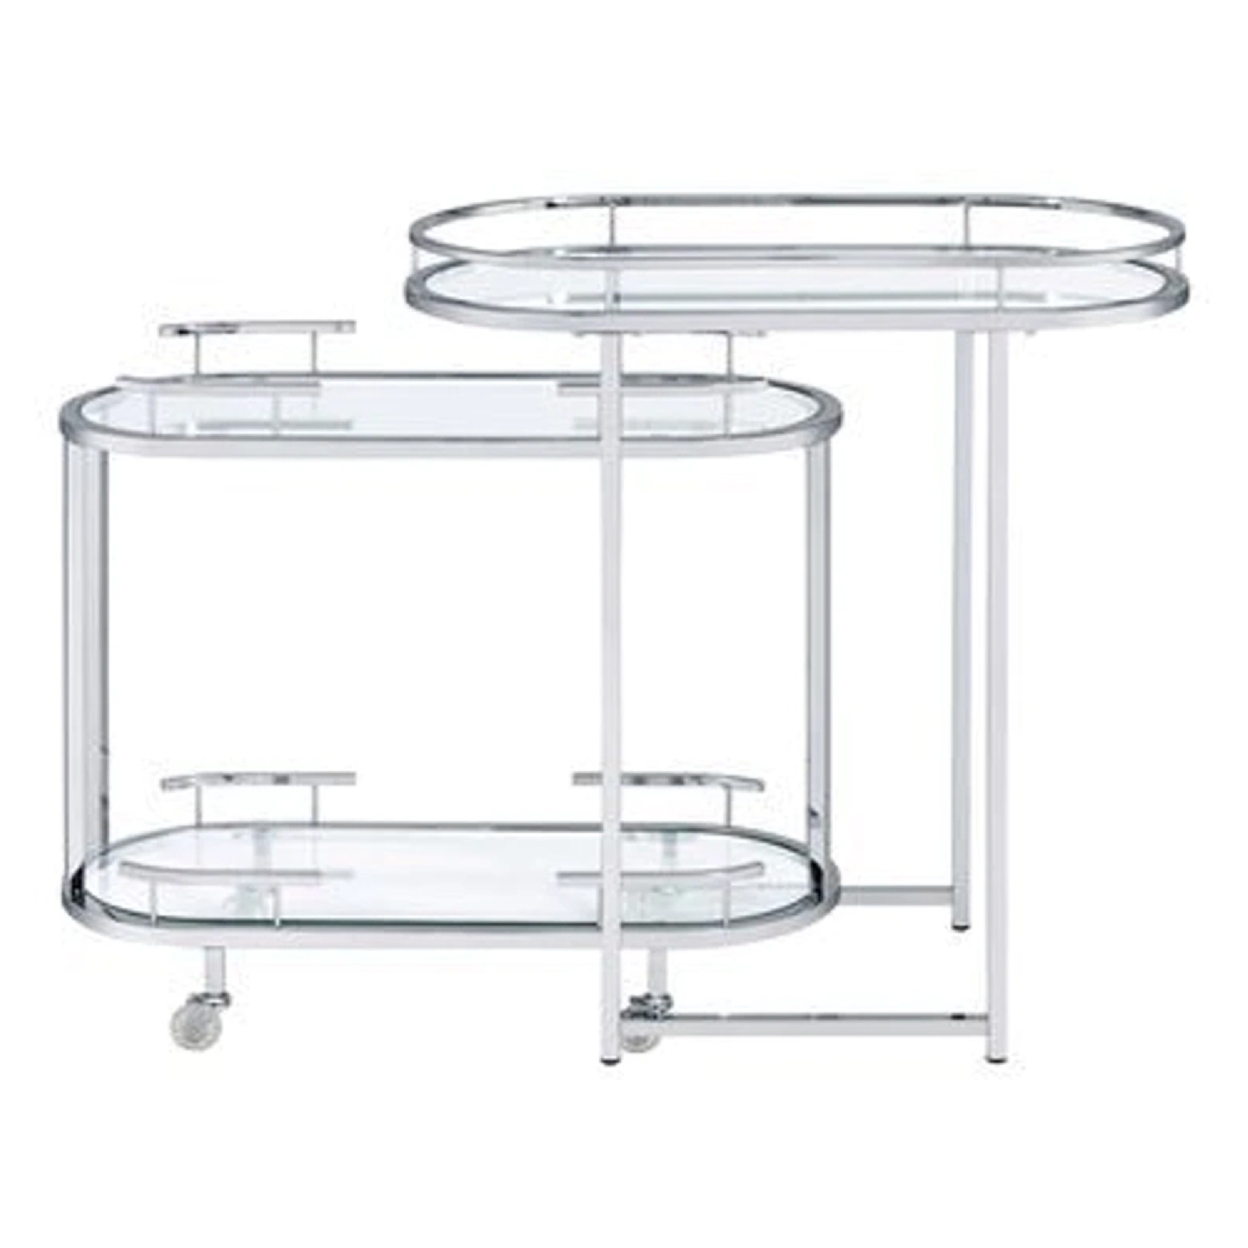 16 Inch Curved 2 Tier Serving Bar Cart With Tempered Glass Shelves, Silver- Saltoro Sherpi